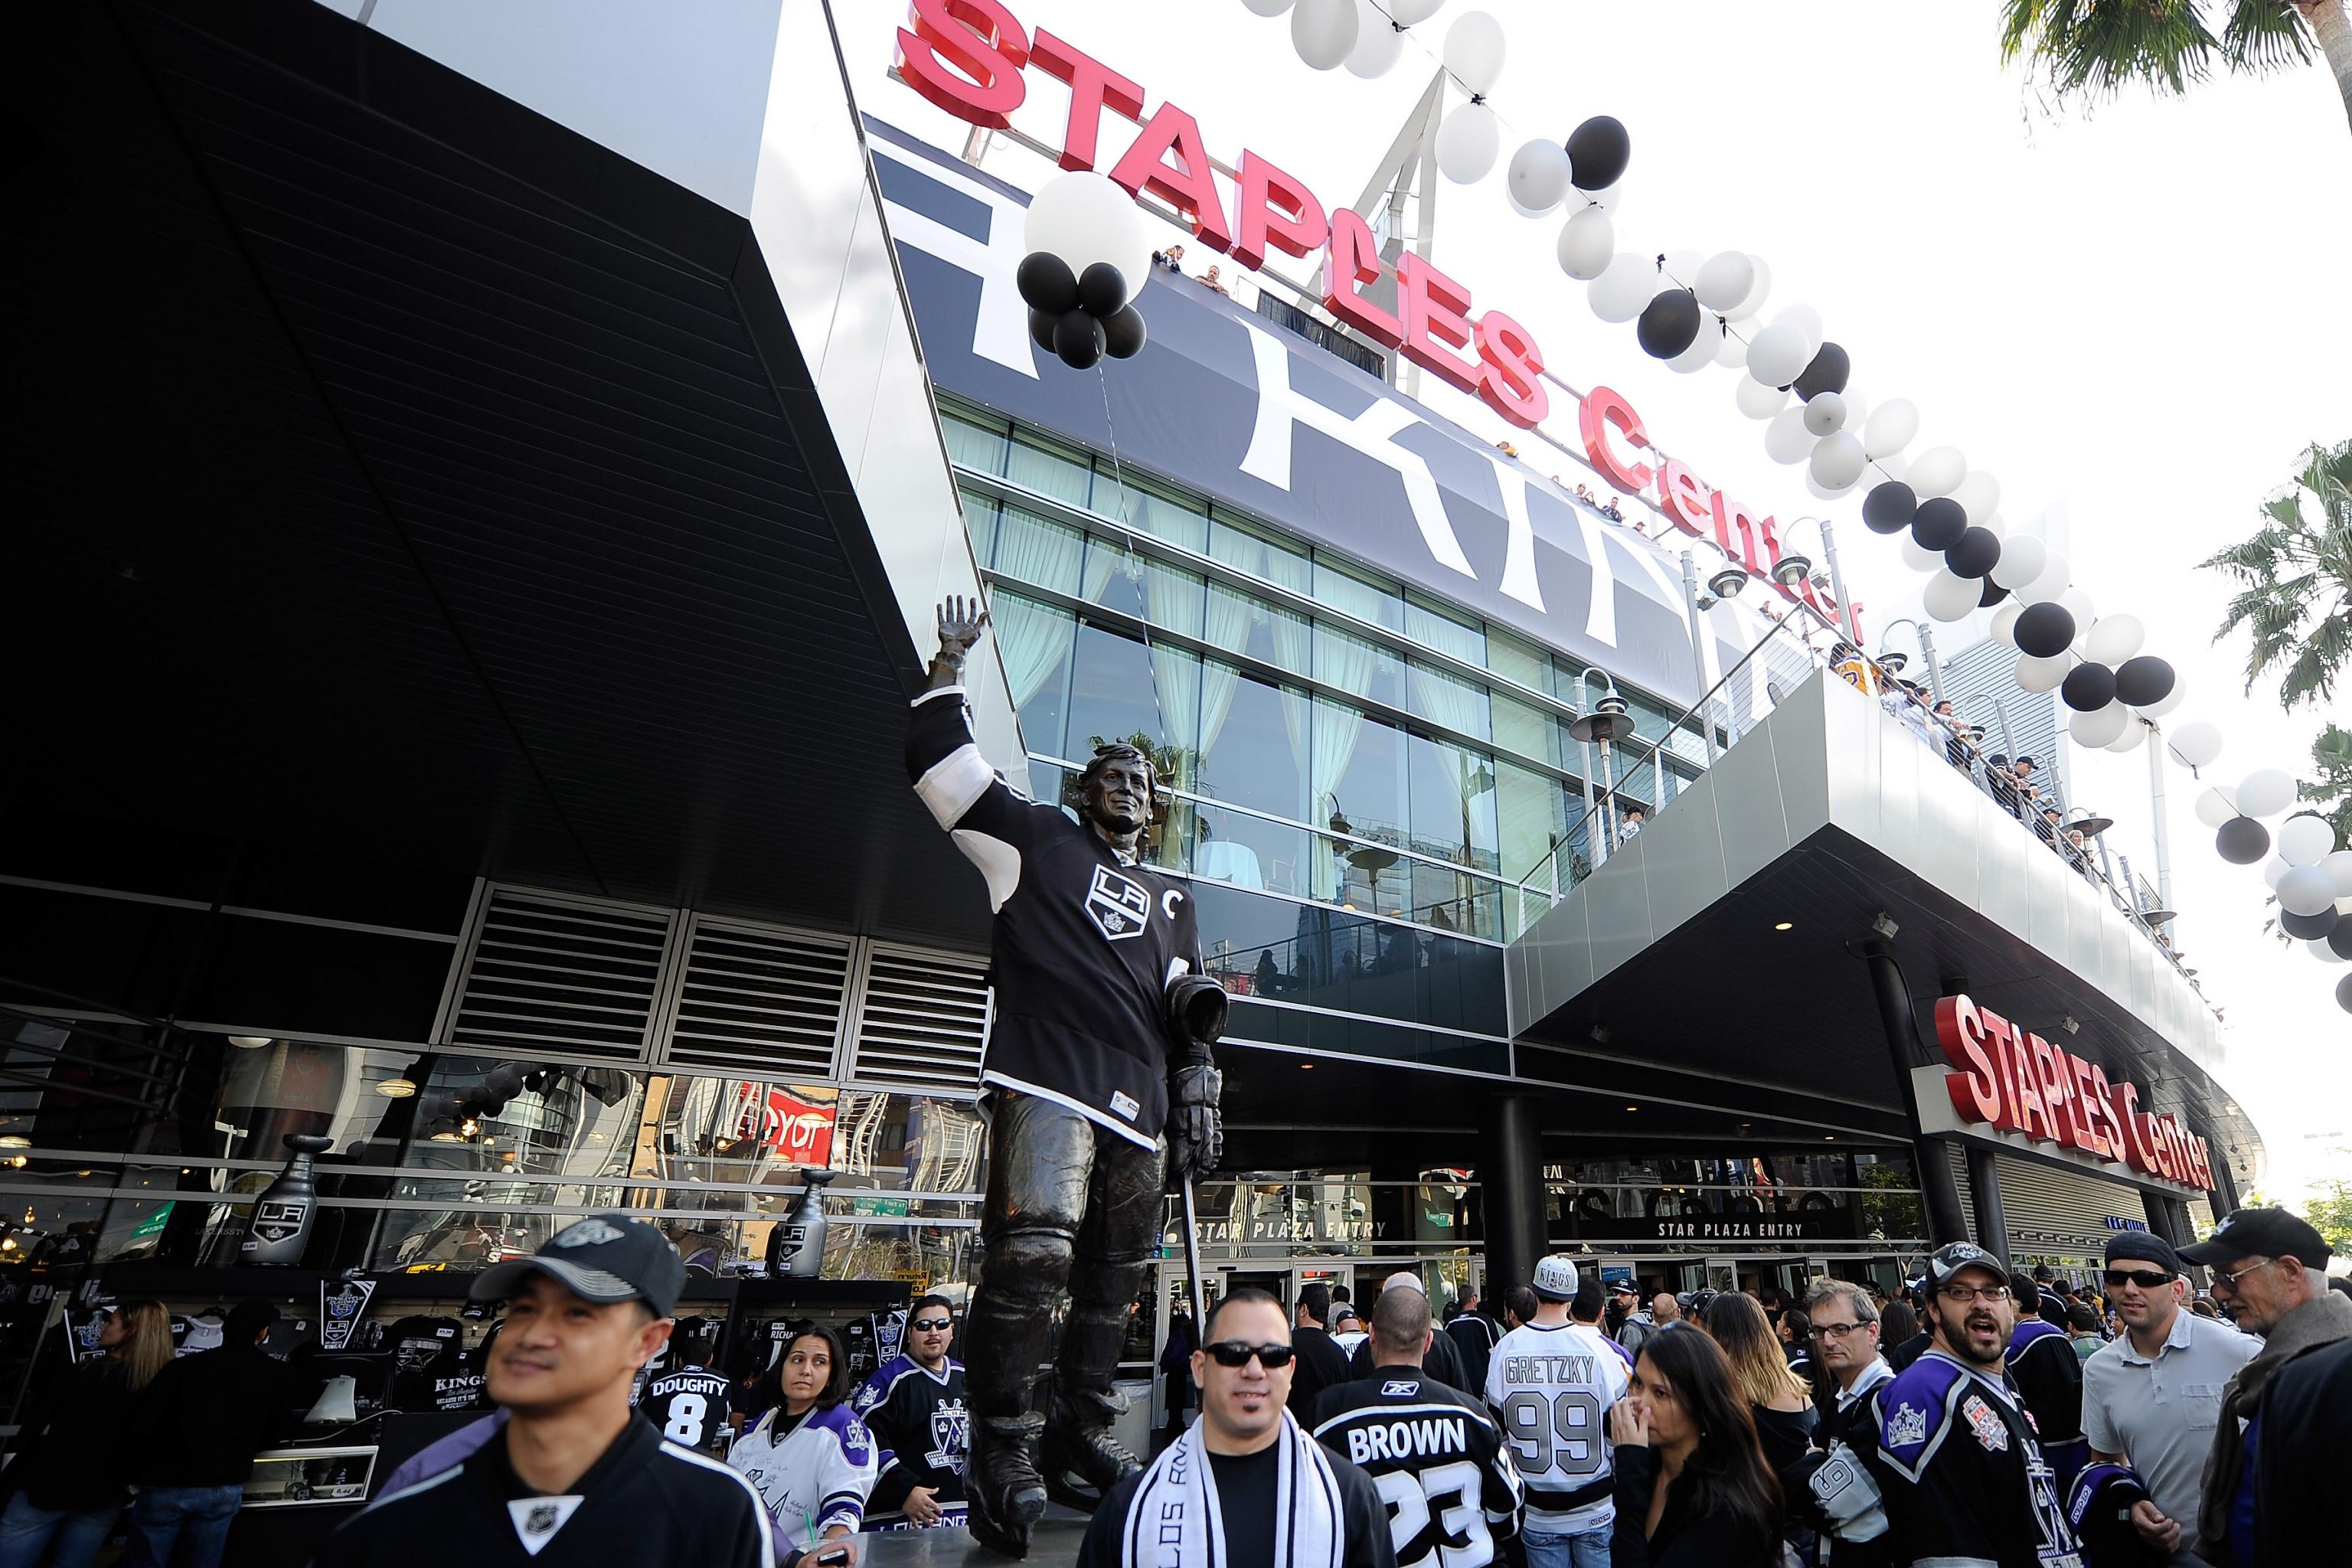 Back in silver and black: Kings make Gretzky-like look their